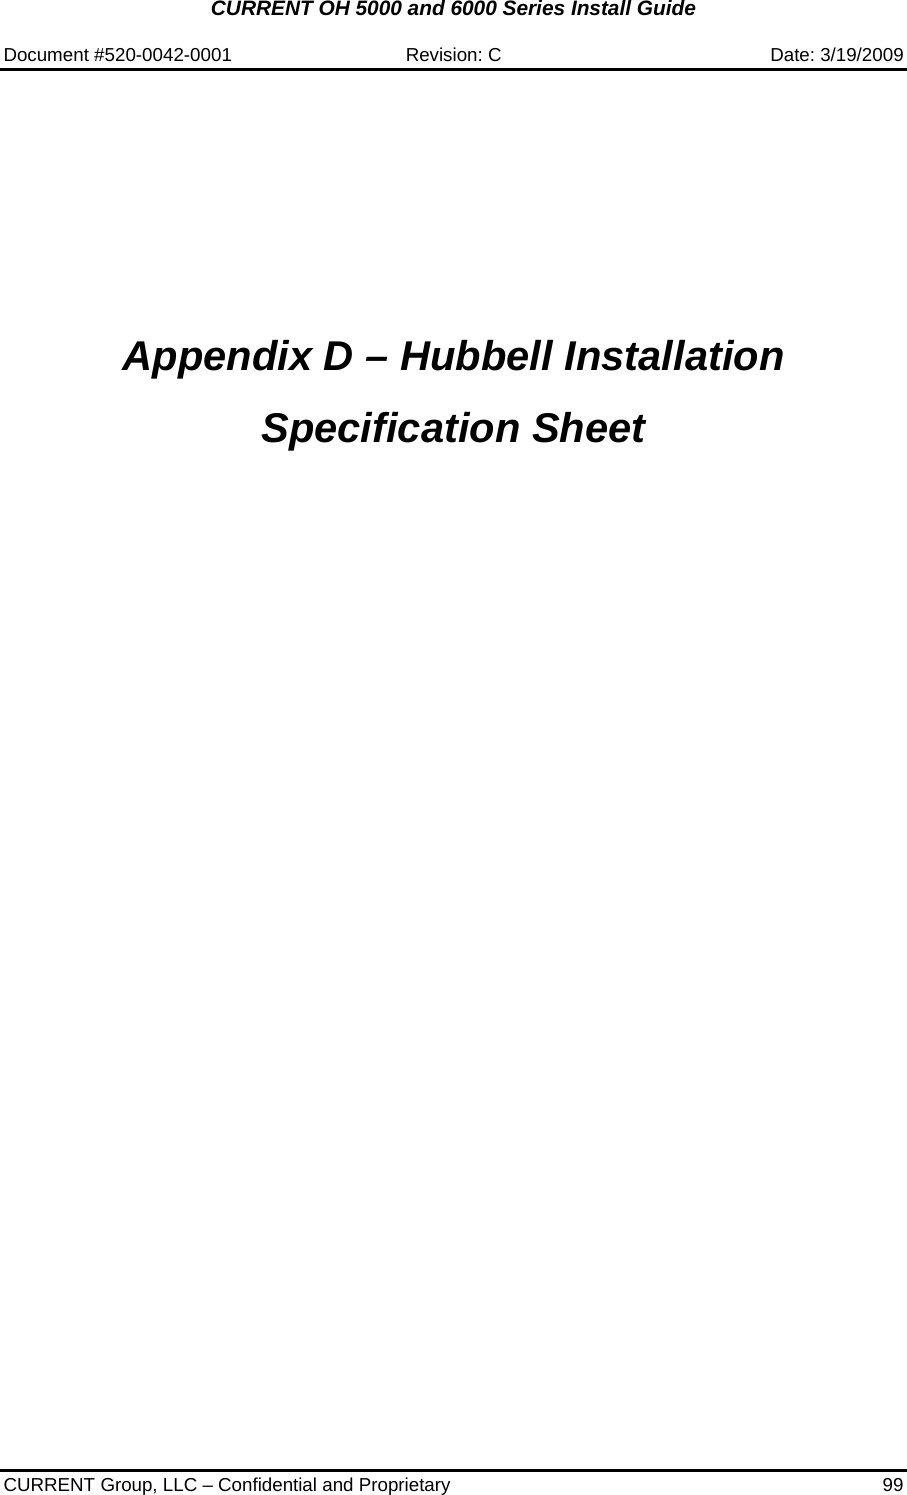 CURRENT OH 5000 and 6000 Series Install Guide  Document #520-0042-0001  Revision: C  Date: 3/19/2009  CURRENT Group, LLC – Confidential and Proprietary  99          Appendix D – Hubbell Installation Specification Sheet              